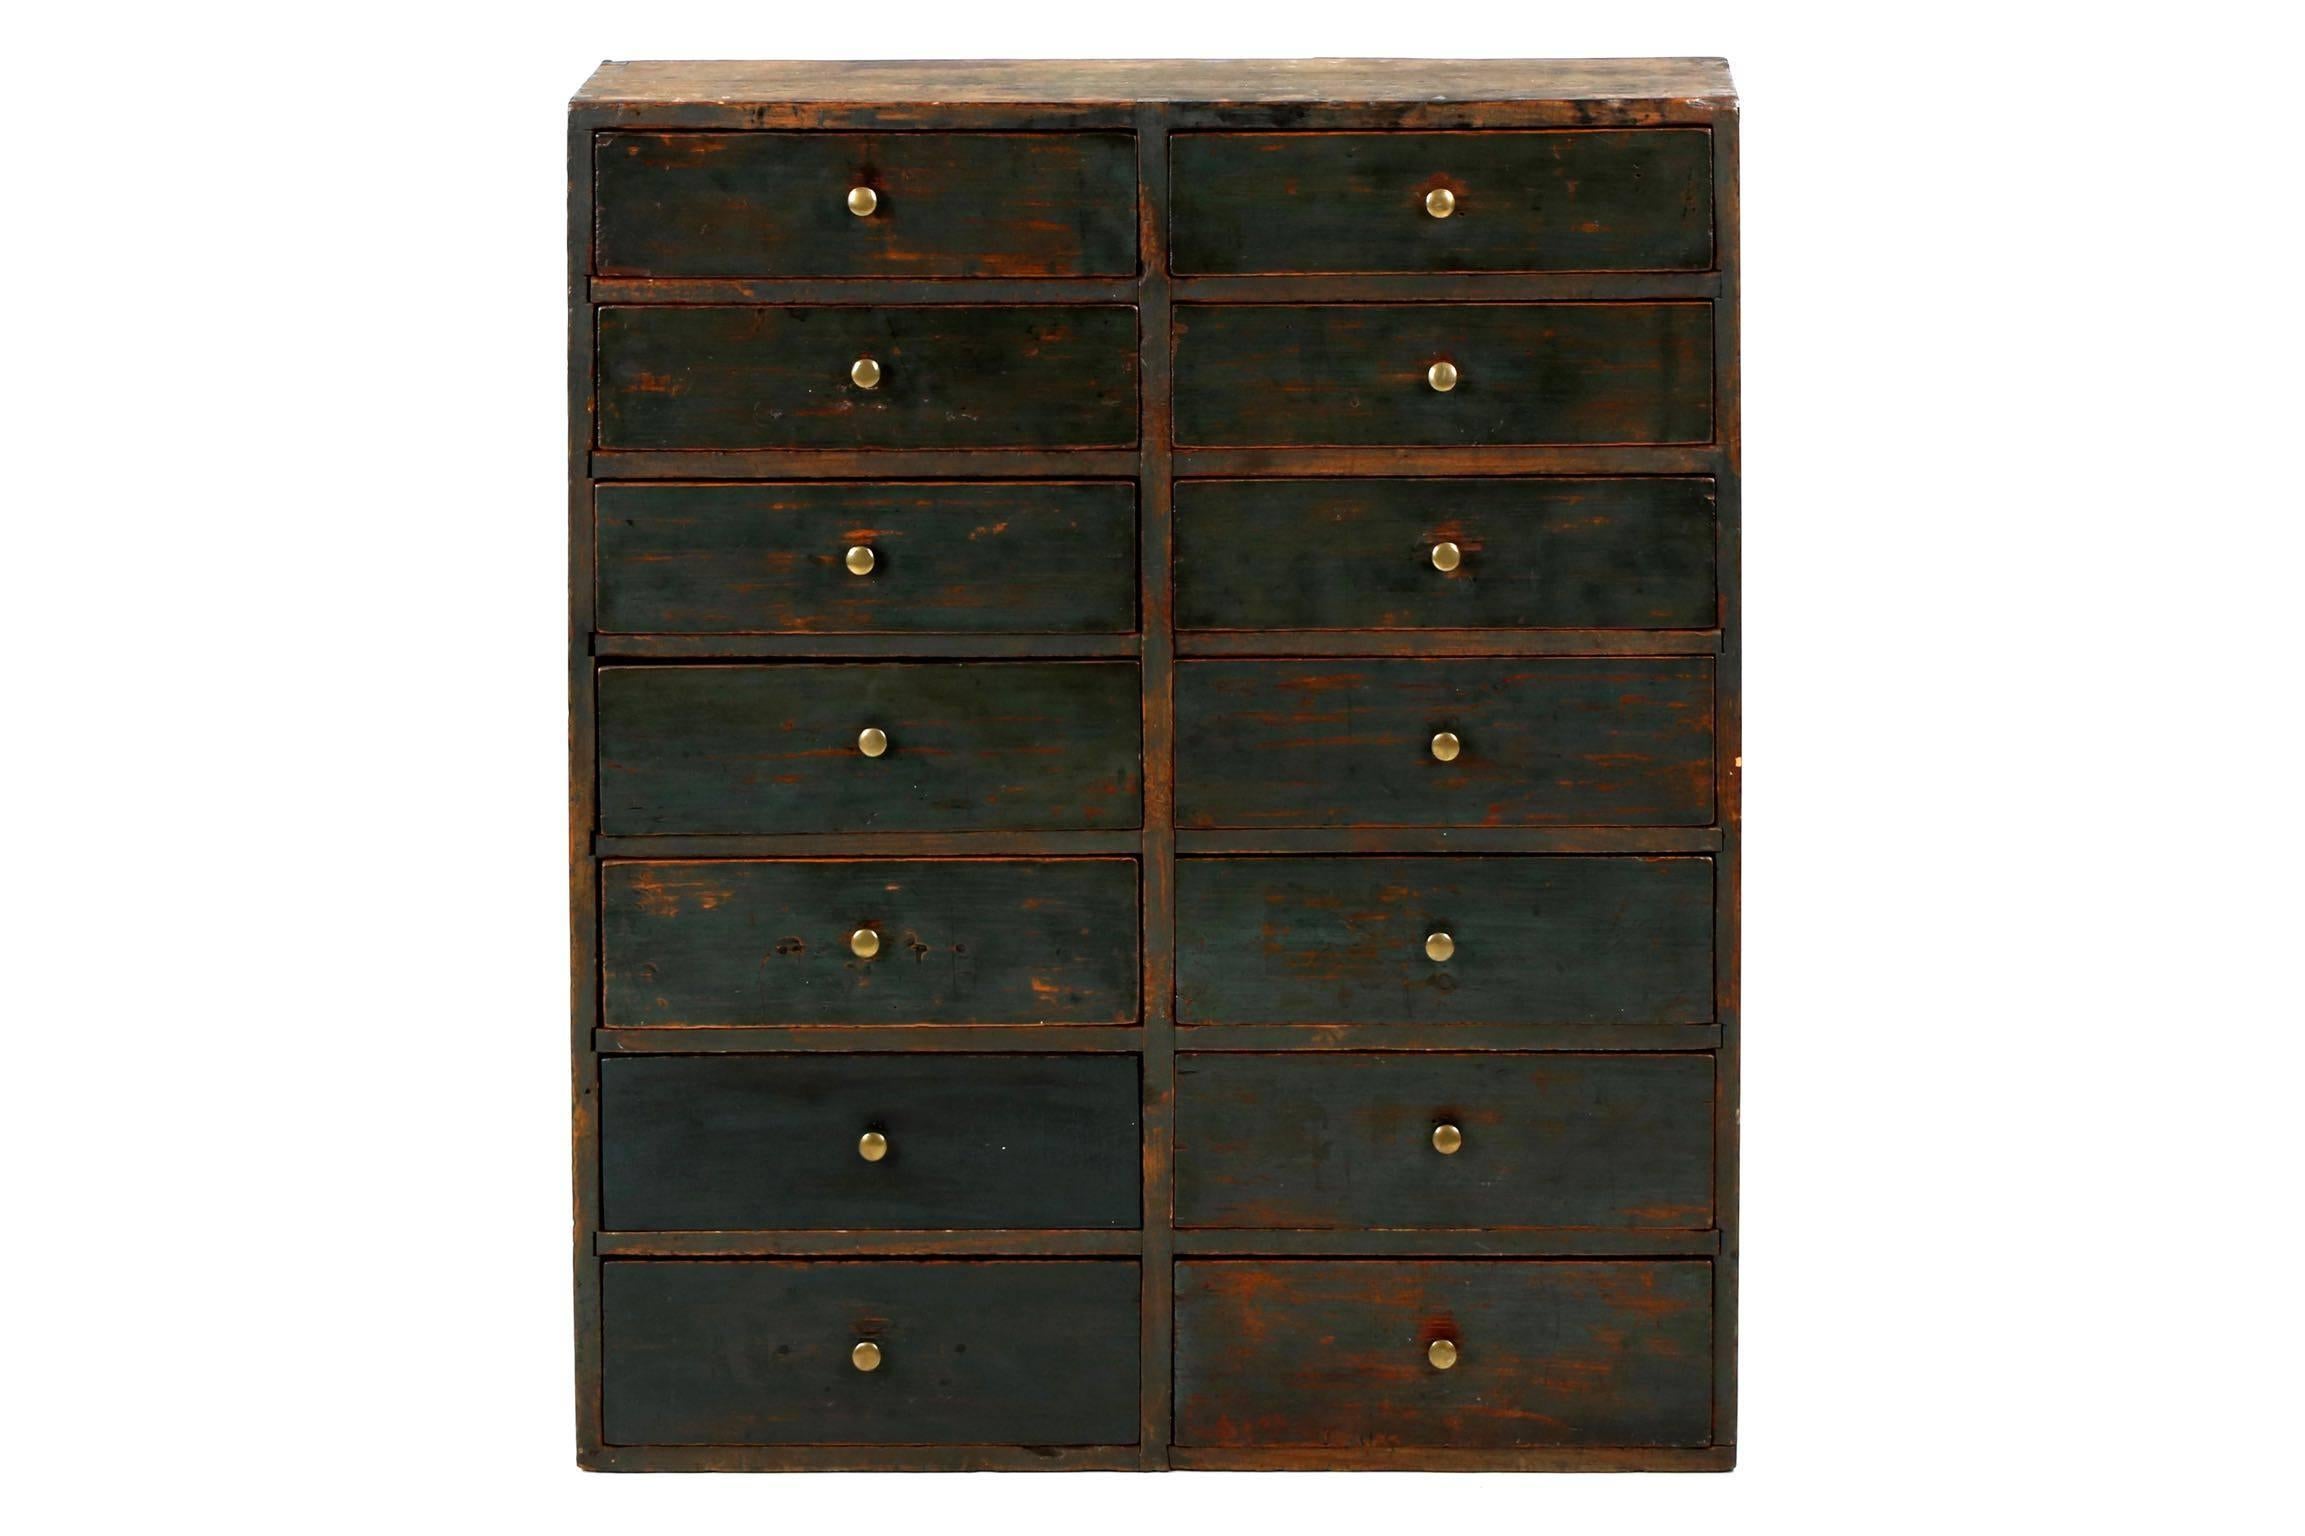 Preserved in lovely condition, this early 19th century apothecary cabinet is austere and angular, a form of clean lines and orderly construction. Dominated by dovetail joinery, the four sides are locked together with large exposed dovetails; the